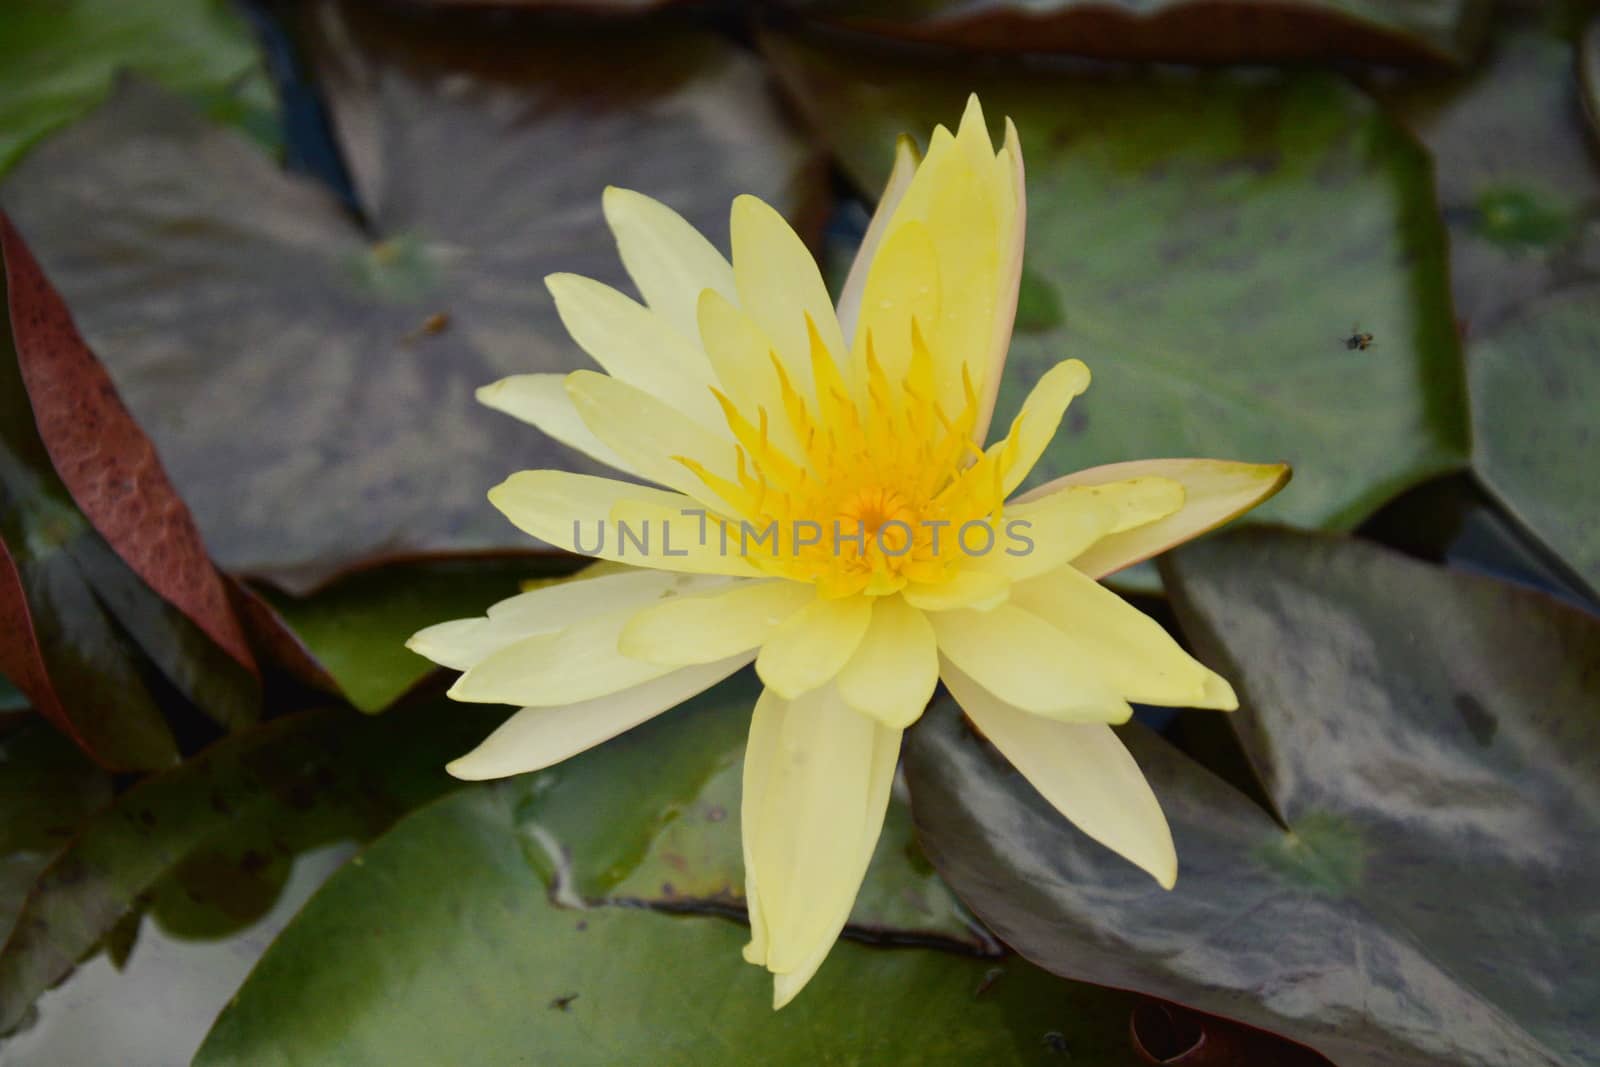 The lotus in the flower bloom is very beautiful. by photomtheart